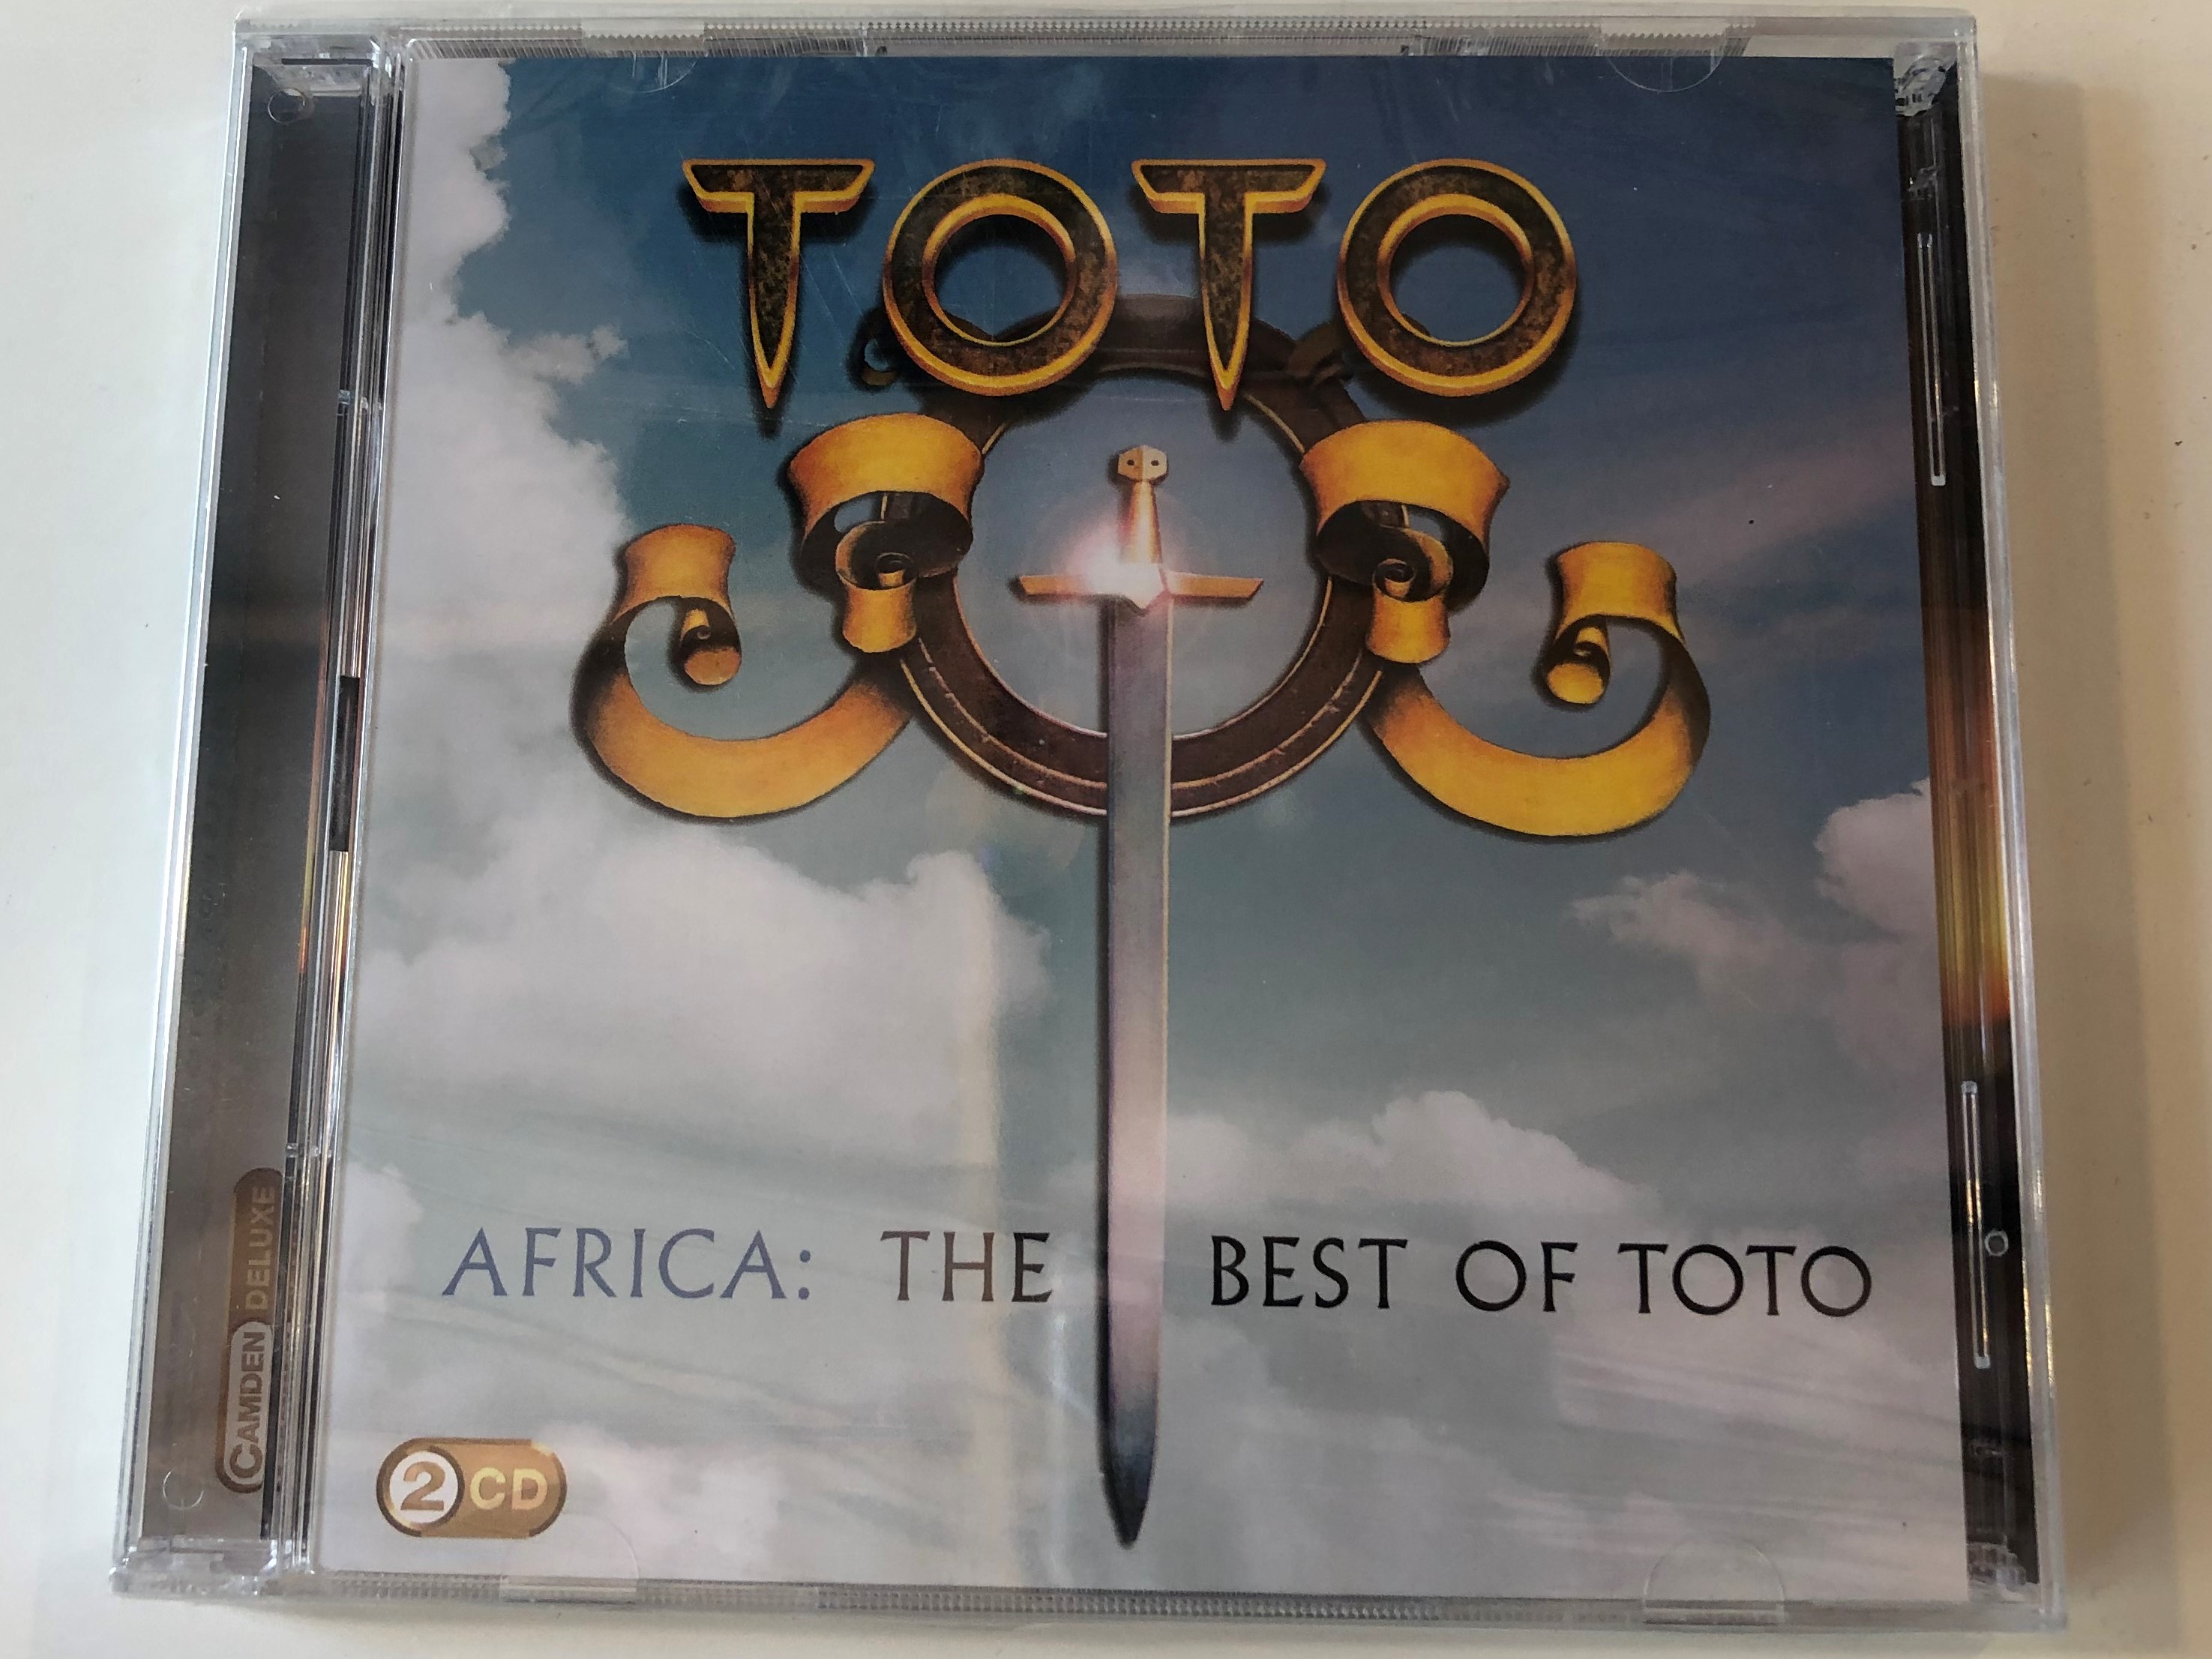 toto-africa-the-best-of-toto-sony-music-2x-audio-cd-2009-88697536632-1-.jpg